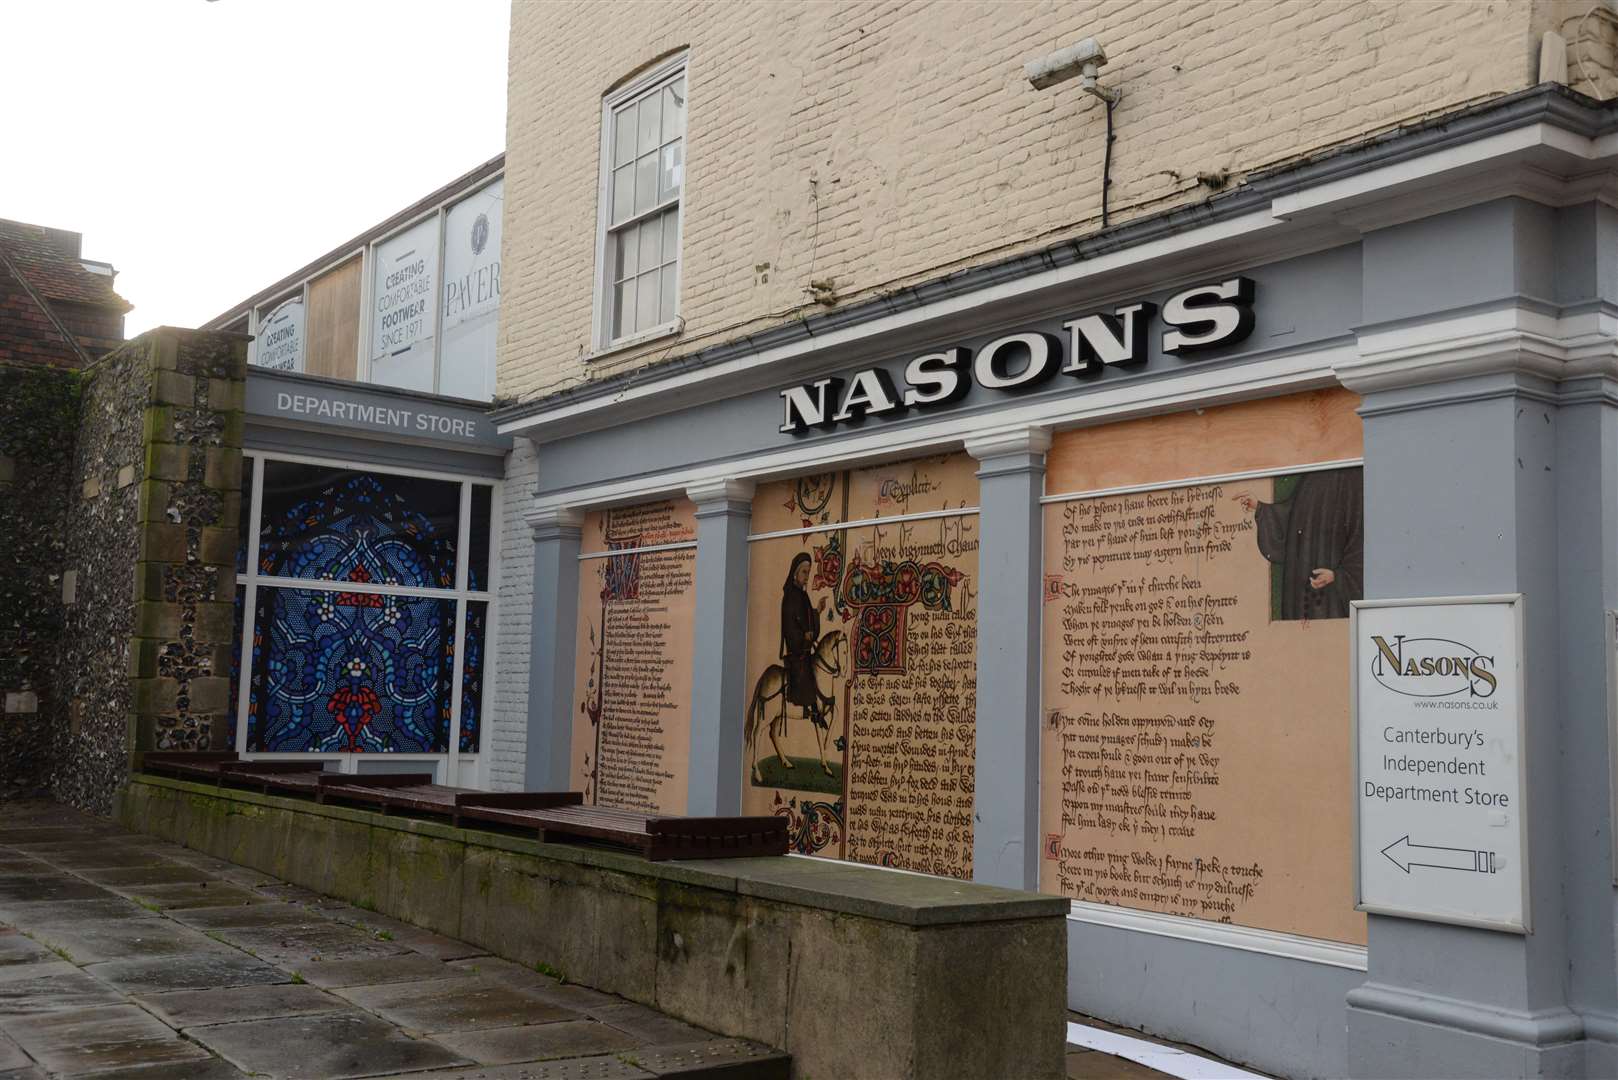 The prominent Nasons site is due to be redeveloped